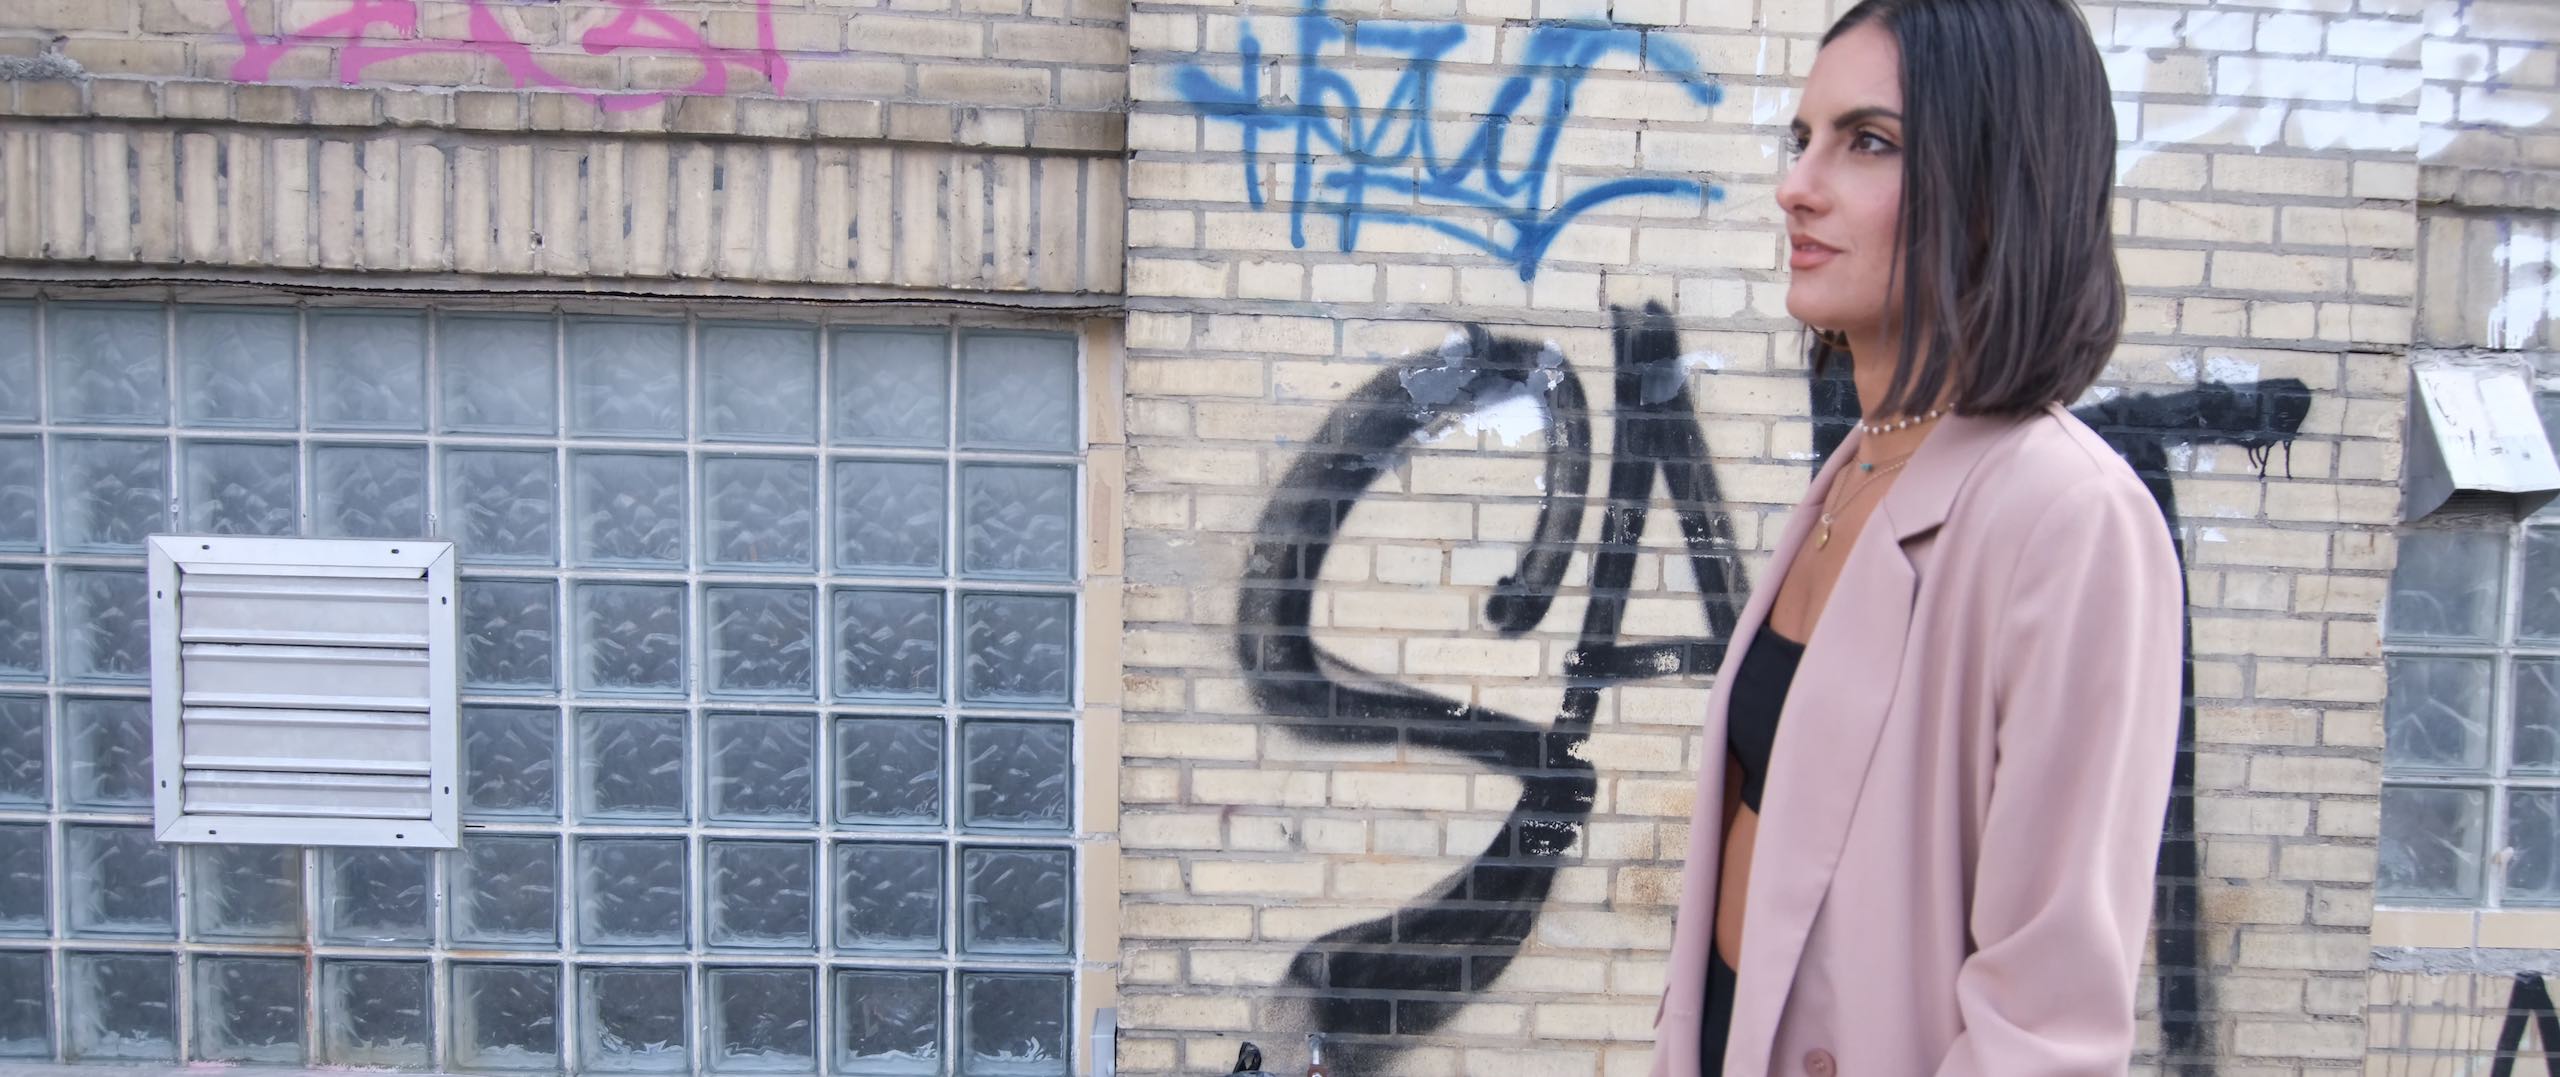 Uncreative Radio with Hana Ostapchuk with a side profile of her wearing a pink dress jacket on a street with graffiti behind her